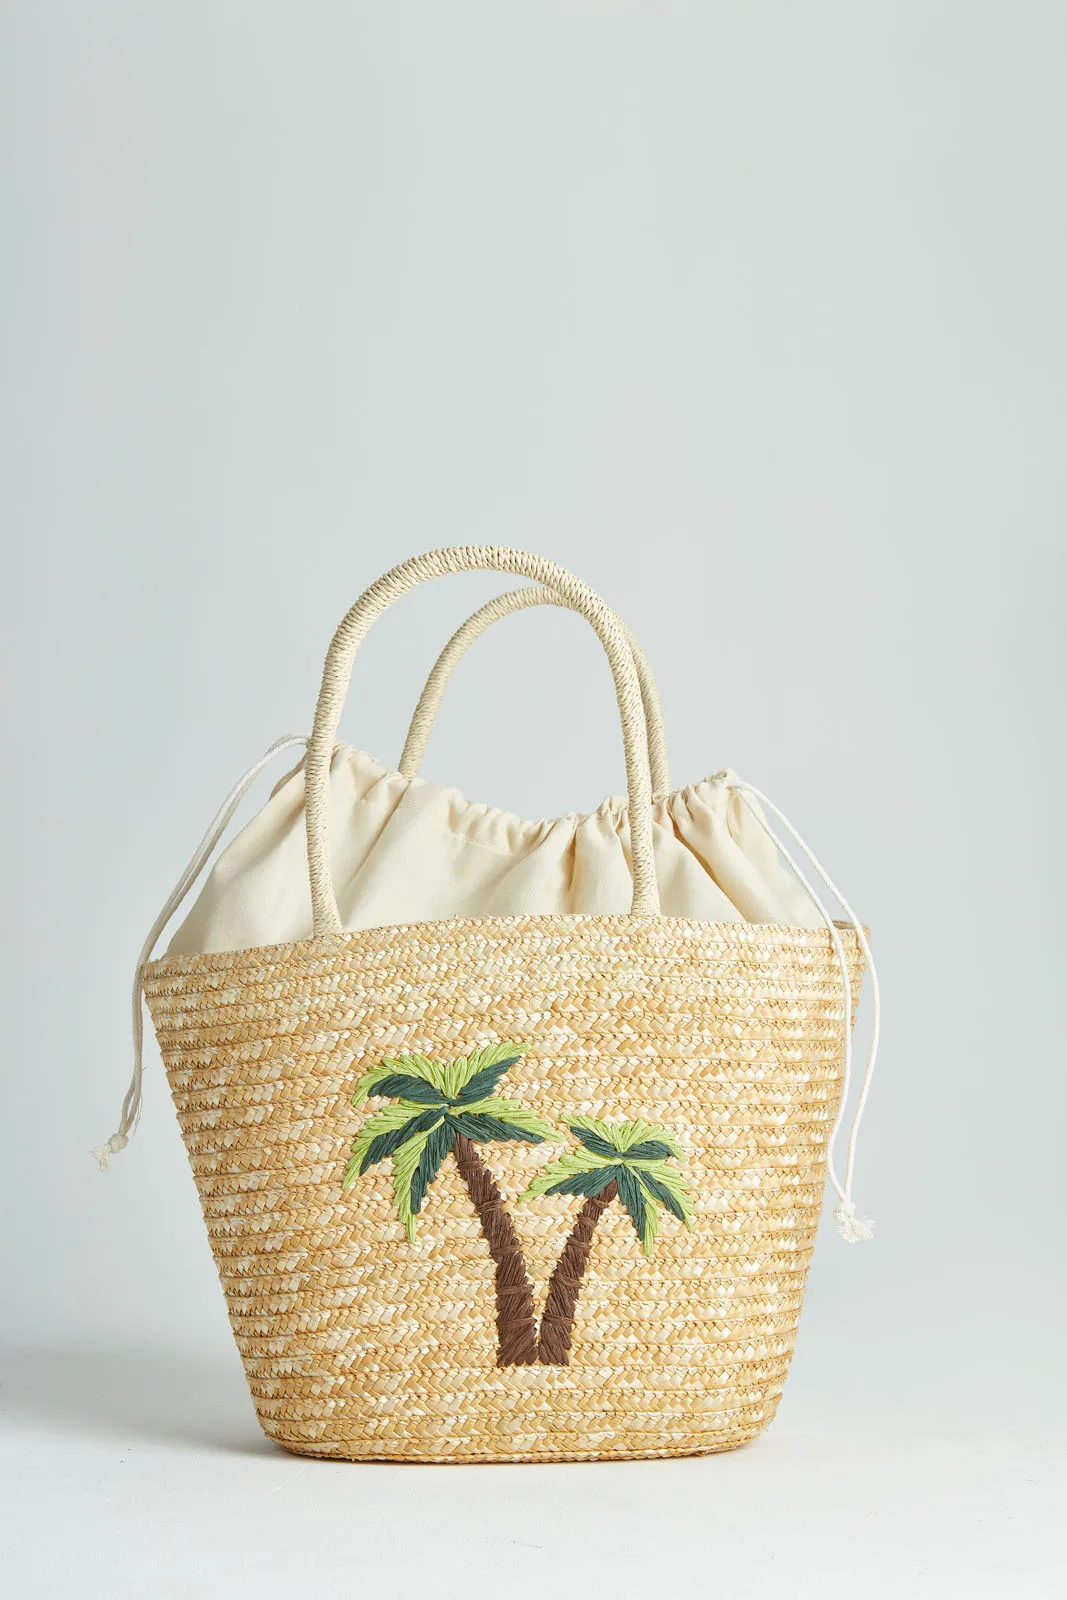 Creme Crab Cabana Tote, Beach Bag, Creme and Gold, Large Tote, Cute Tote, Gift for Her, Summer Bag, Beach Tote, Cream Tote Bag